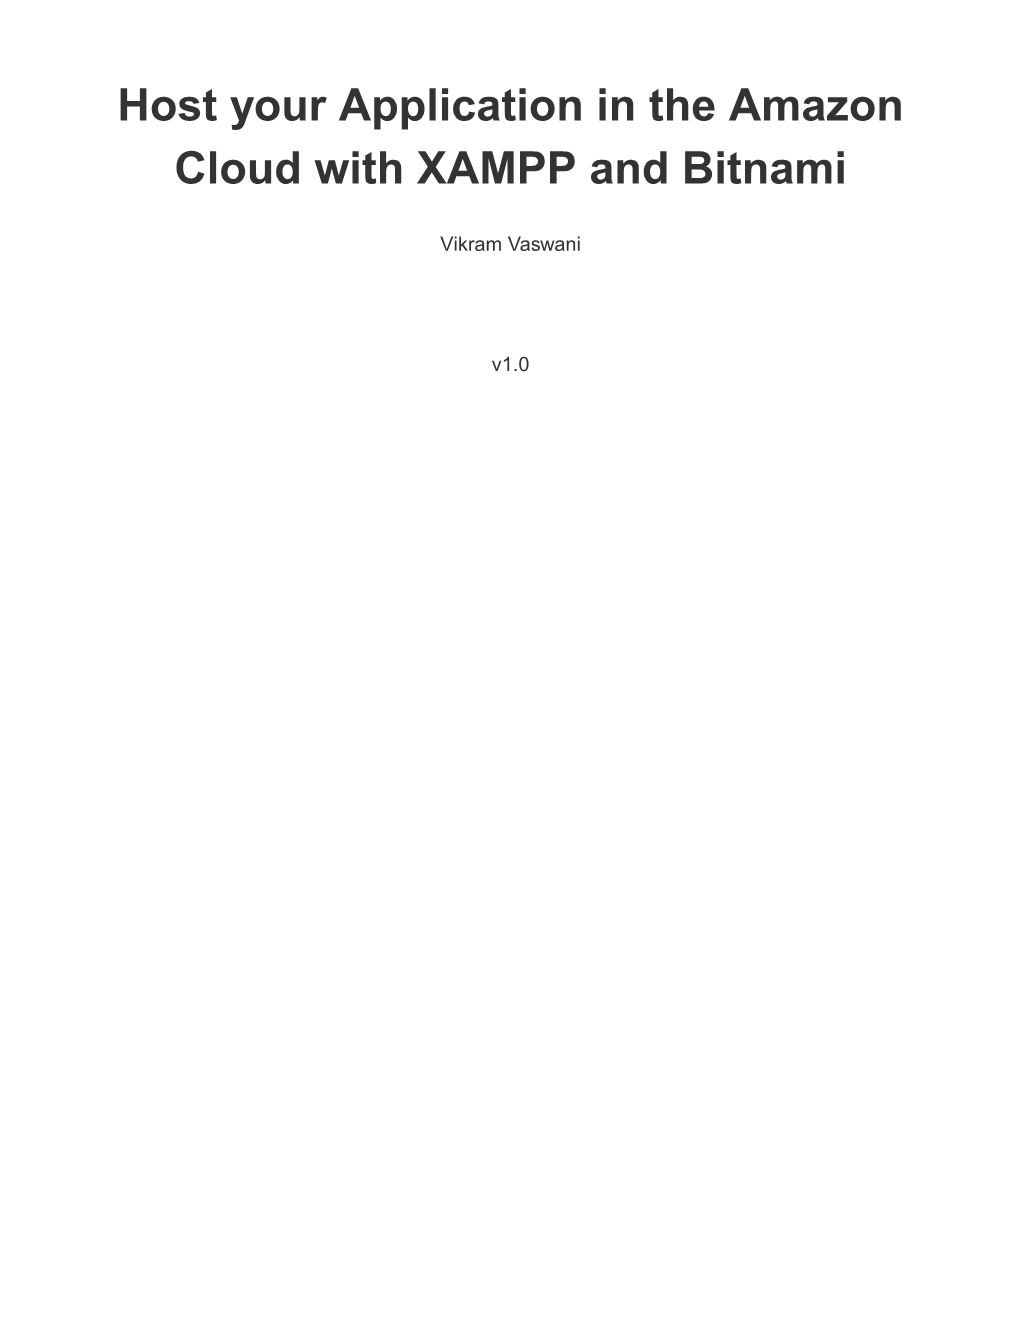 Host Your Application in the Amazon Cloud with XAMPP and Bitnami